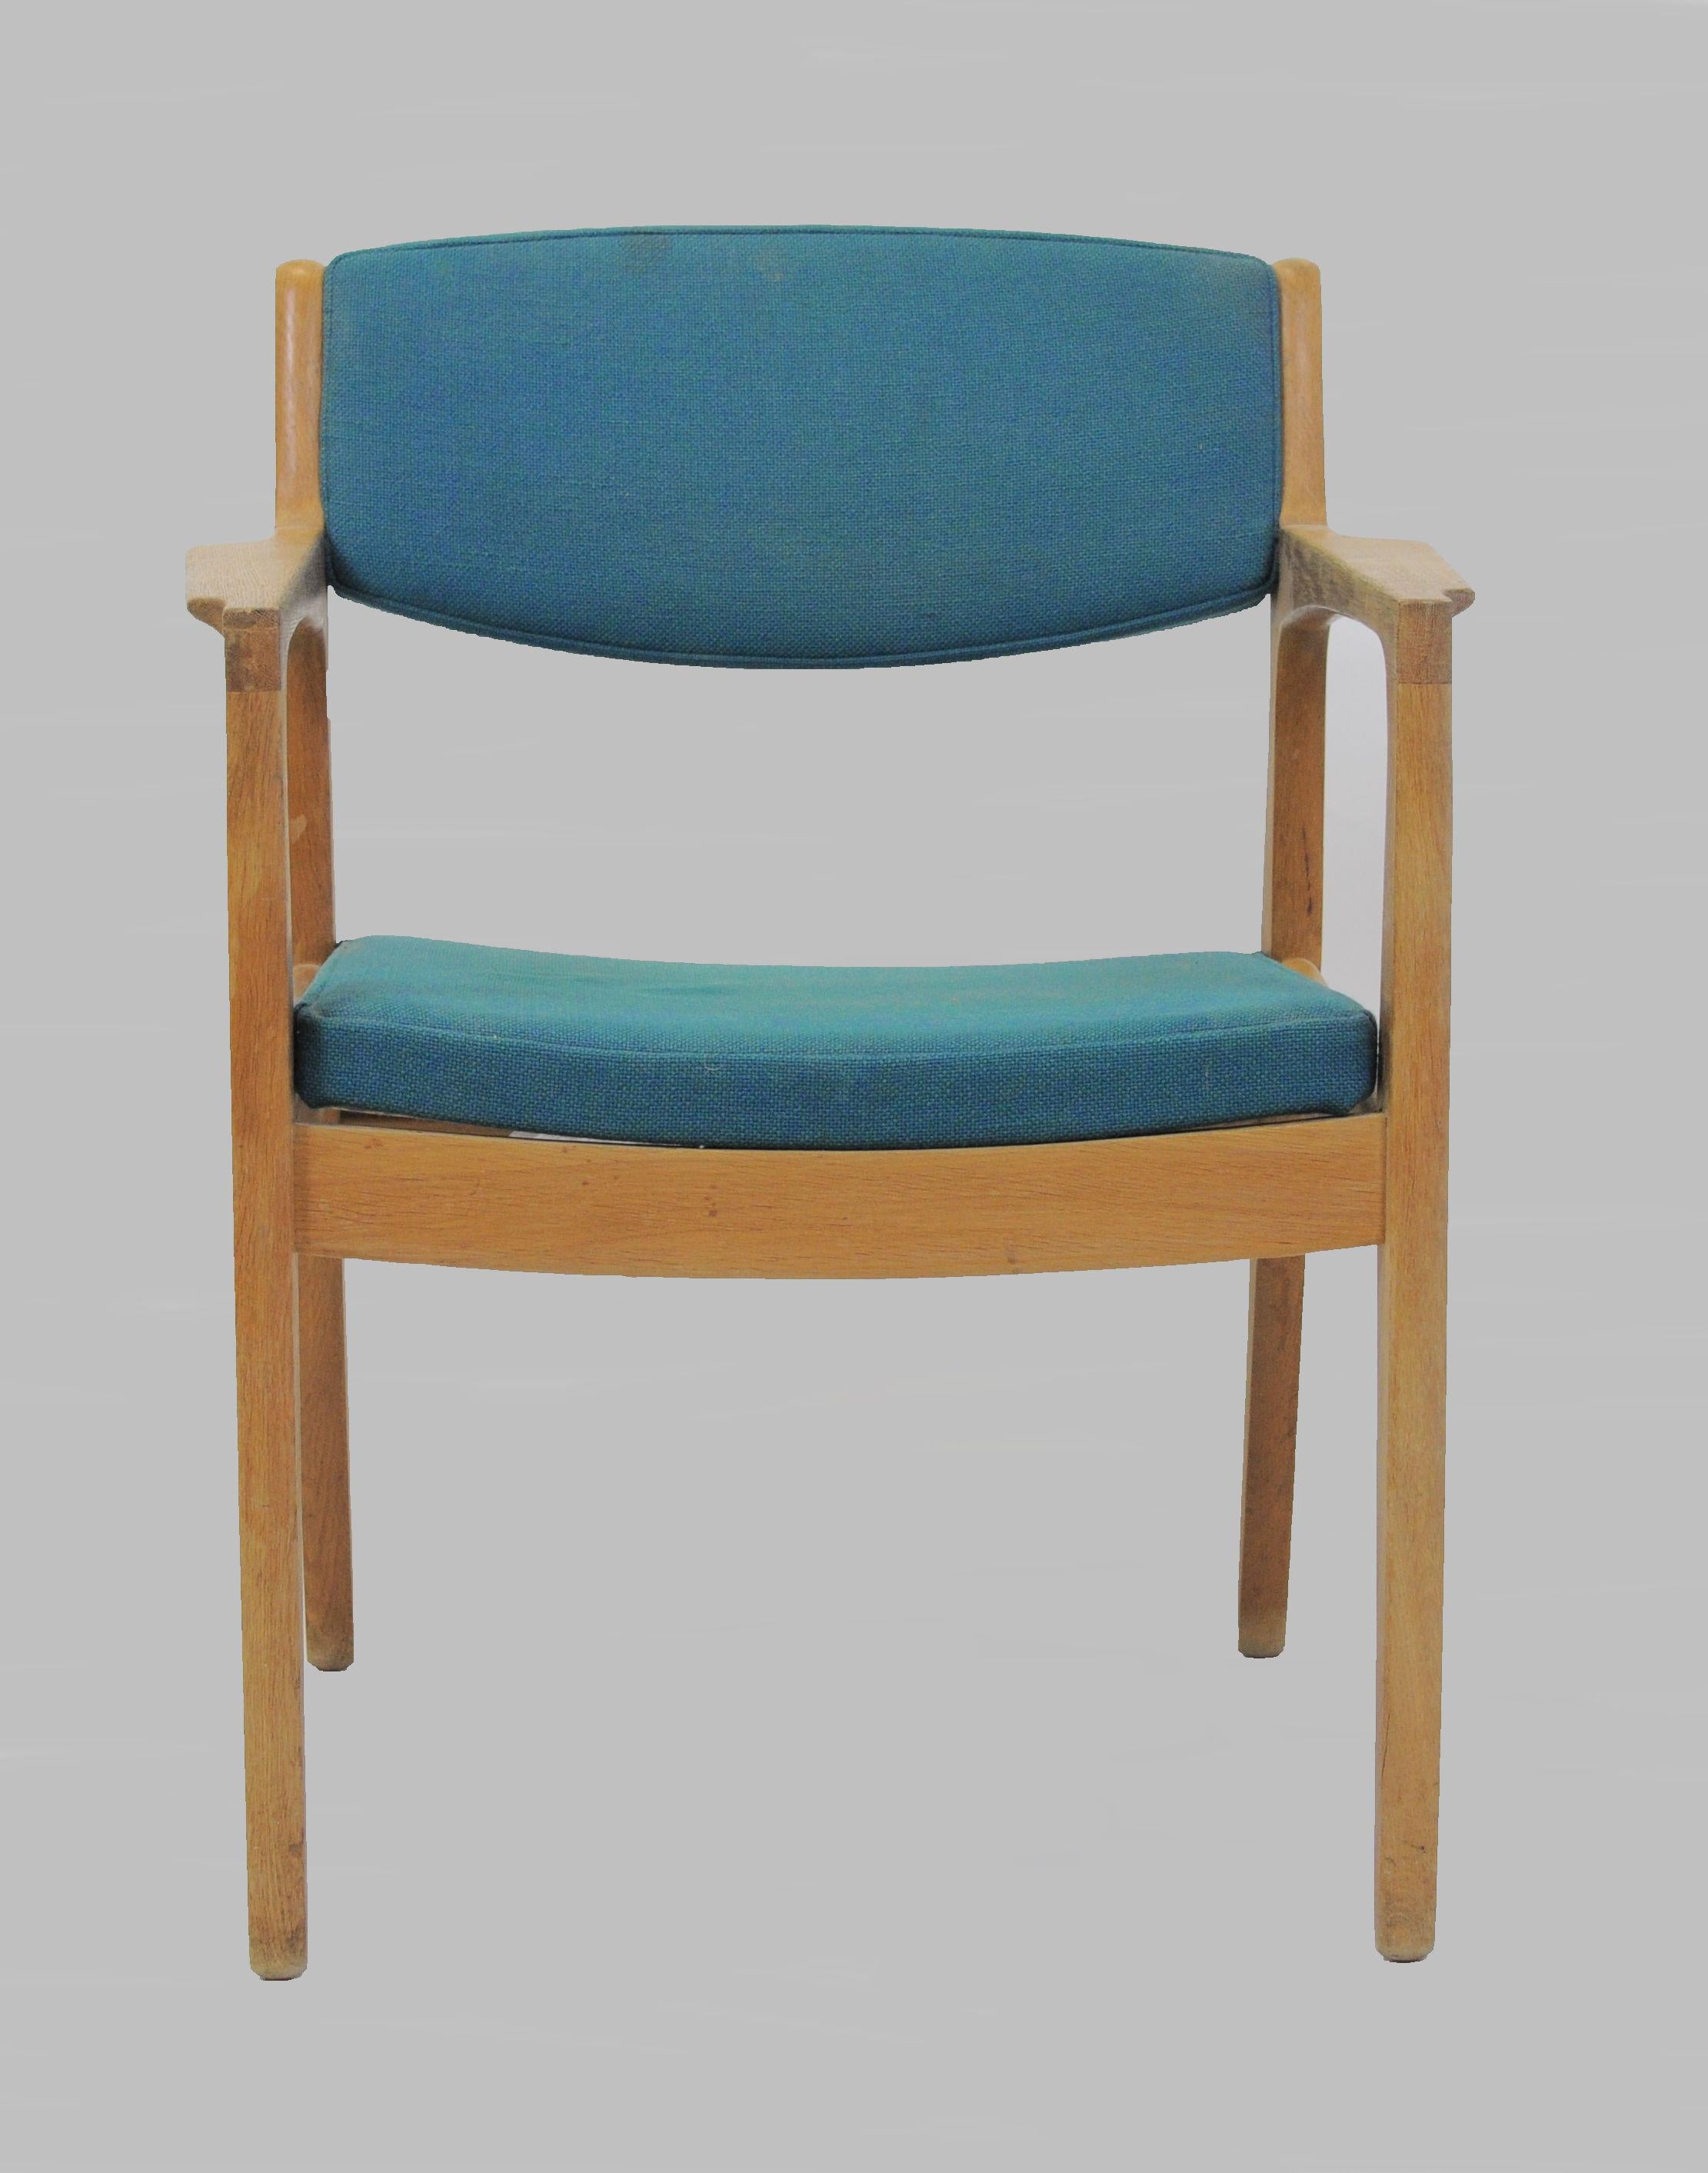 1960s armchairs designed by Erik Buch and produced by Ørum Møbler.

The comfortable chairs are made of a solid oak frame. The chairs have been overlooked and refinished by our cabinetmaker to insure that they are in very good condition with only